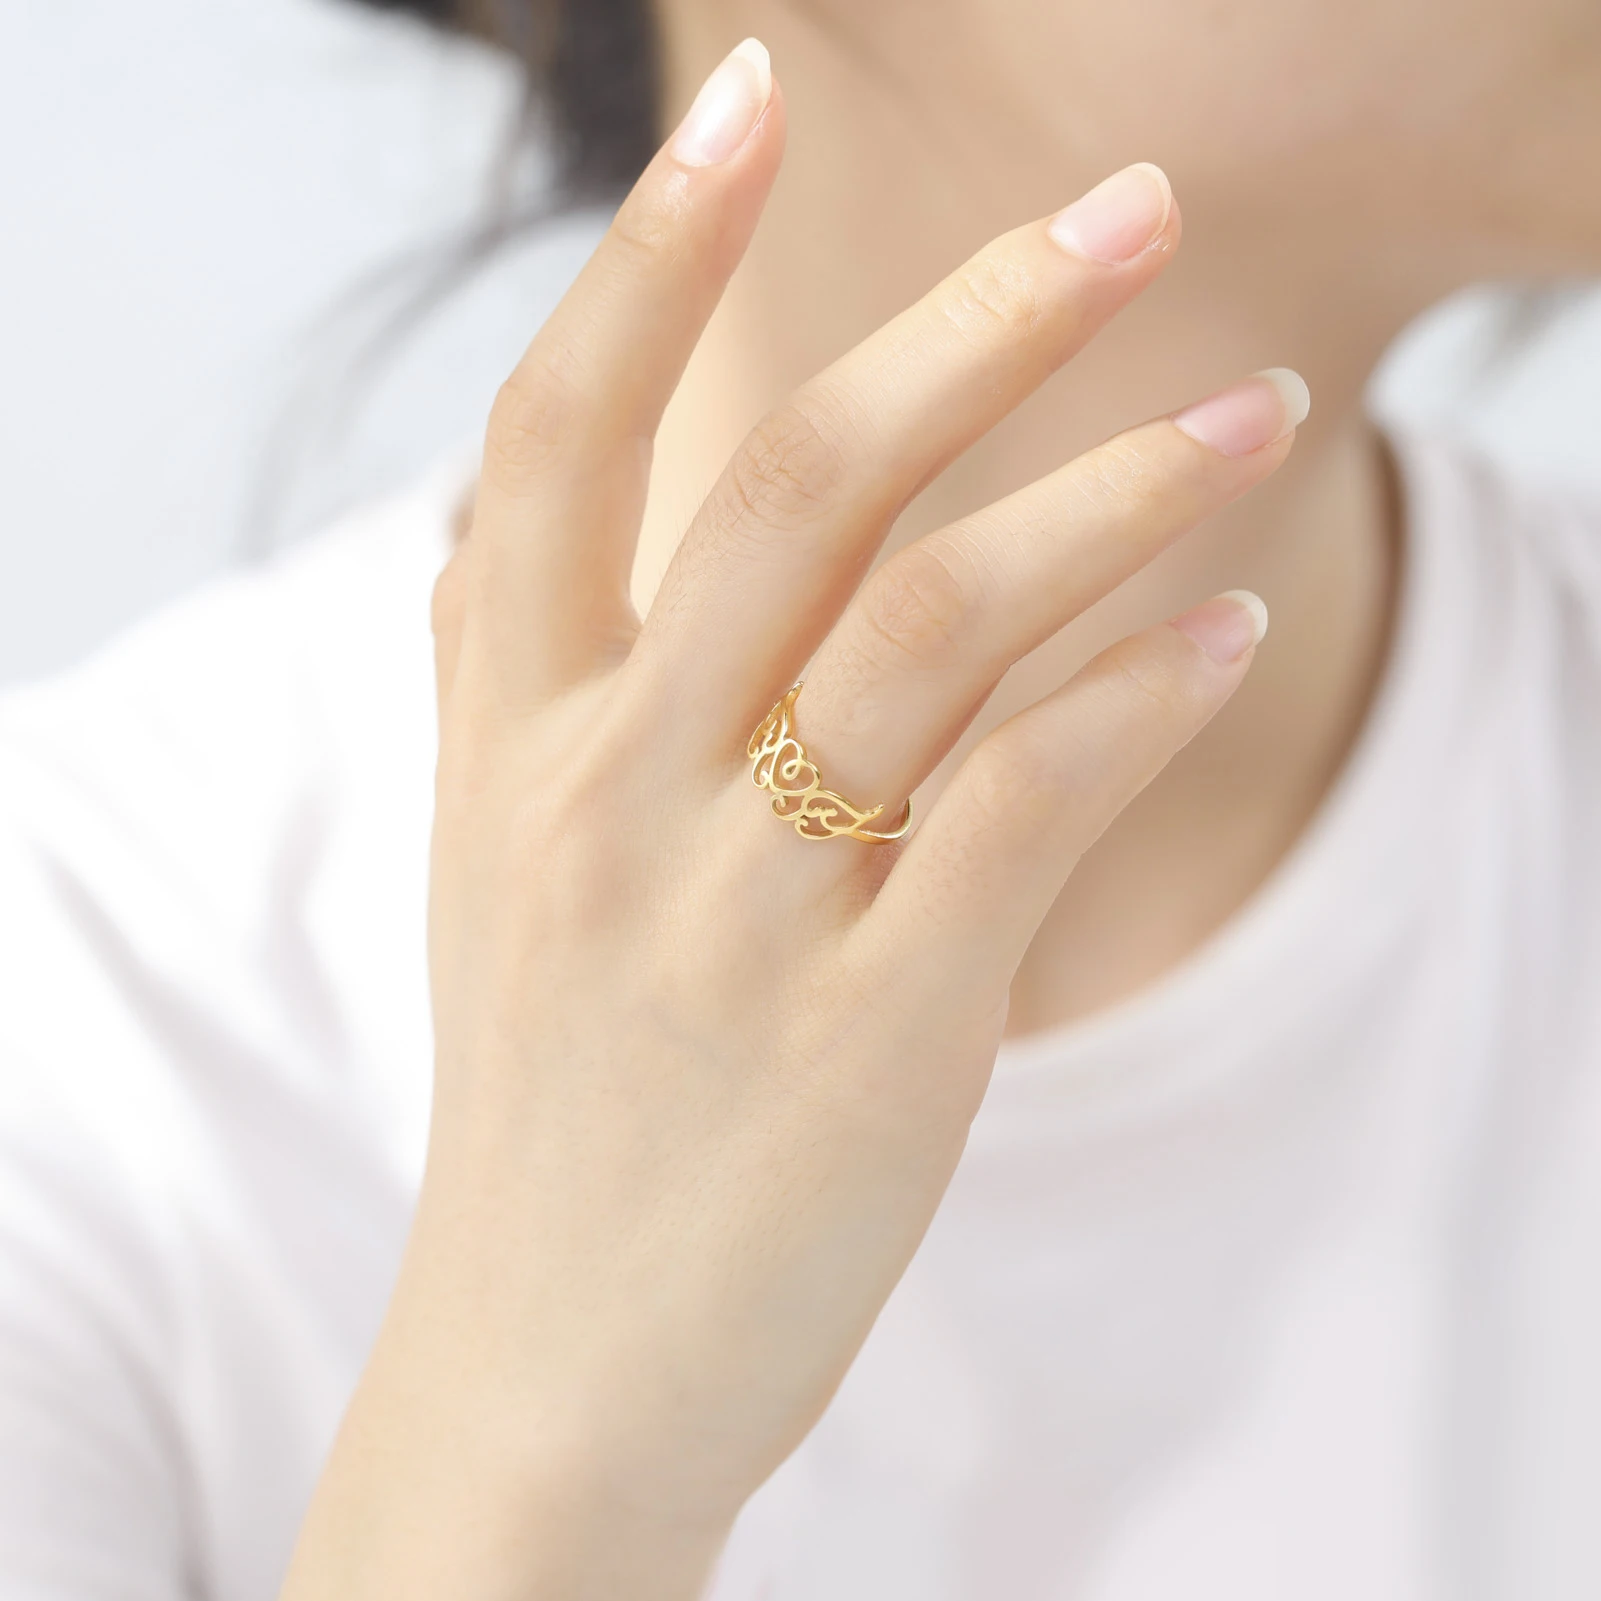 Get Abstract Pattern Golden Finger Ring at ₹ 449 | LBB Shop